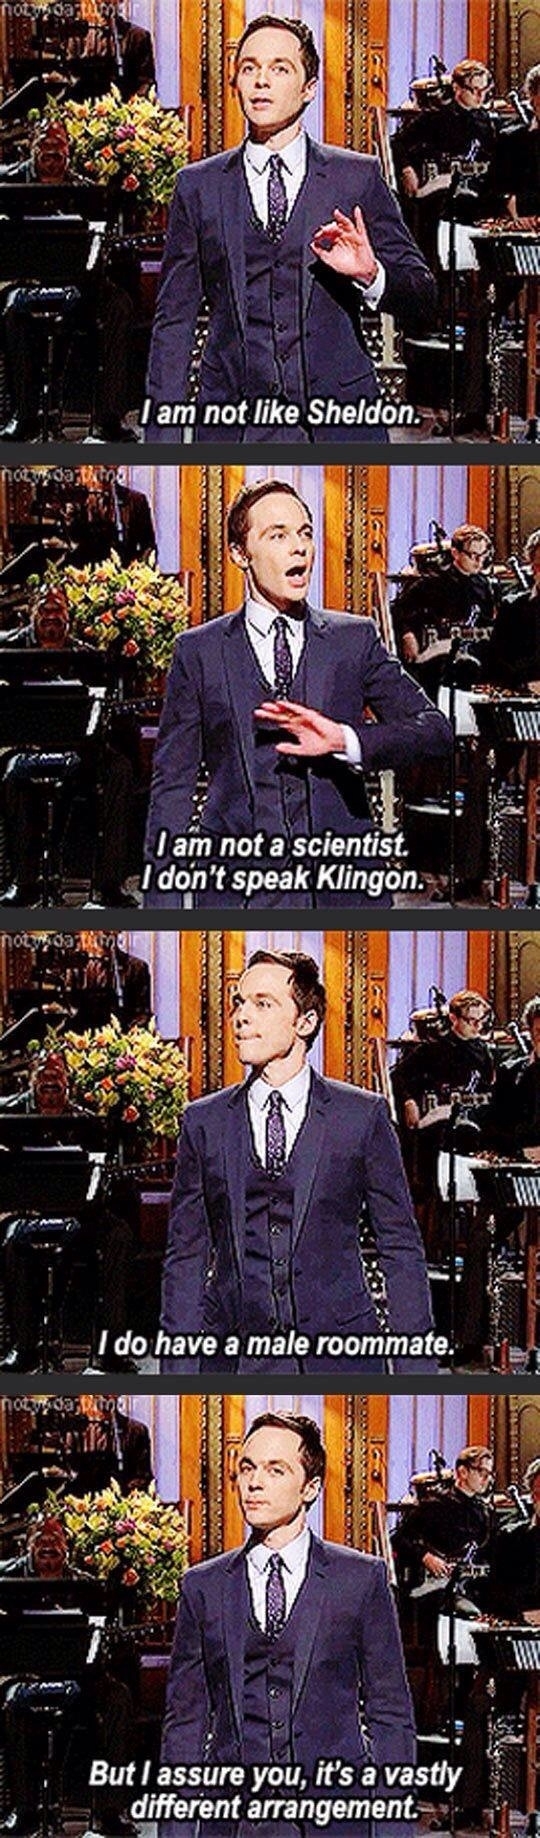 Jim Parsons comparing himself with Sheldon